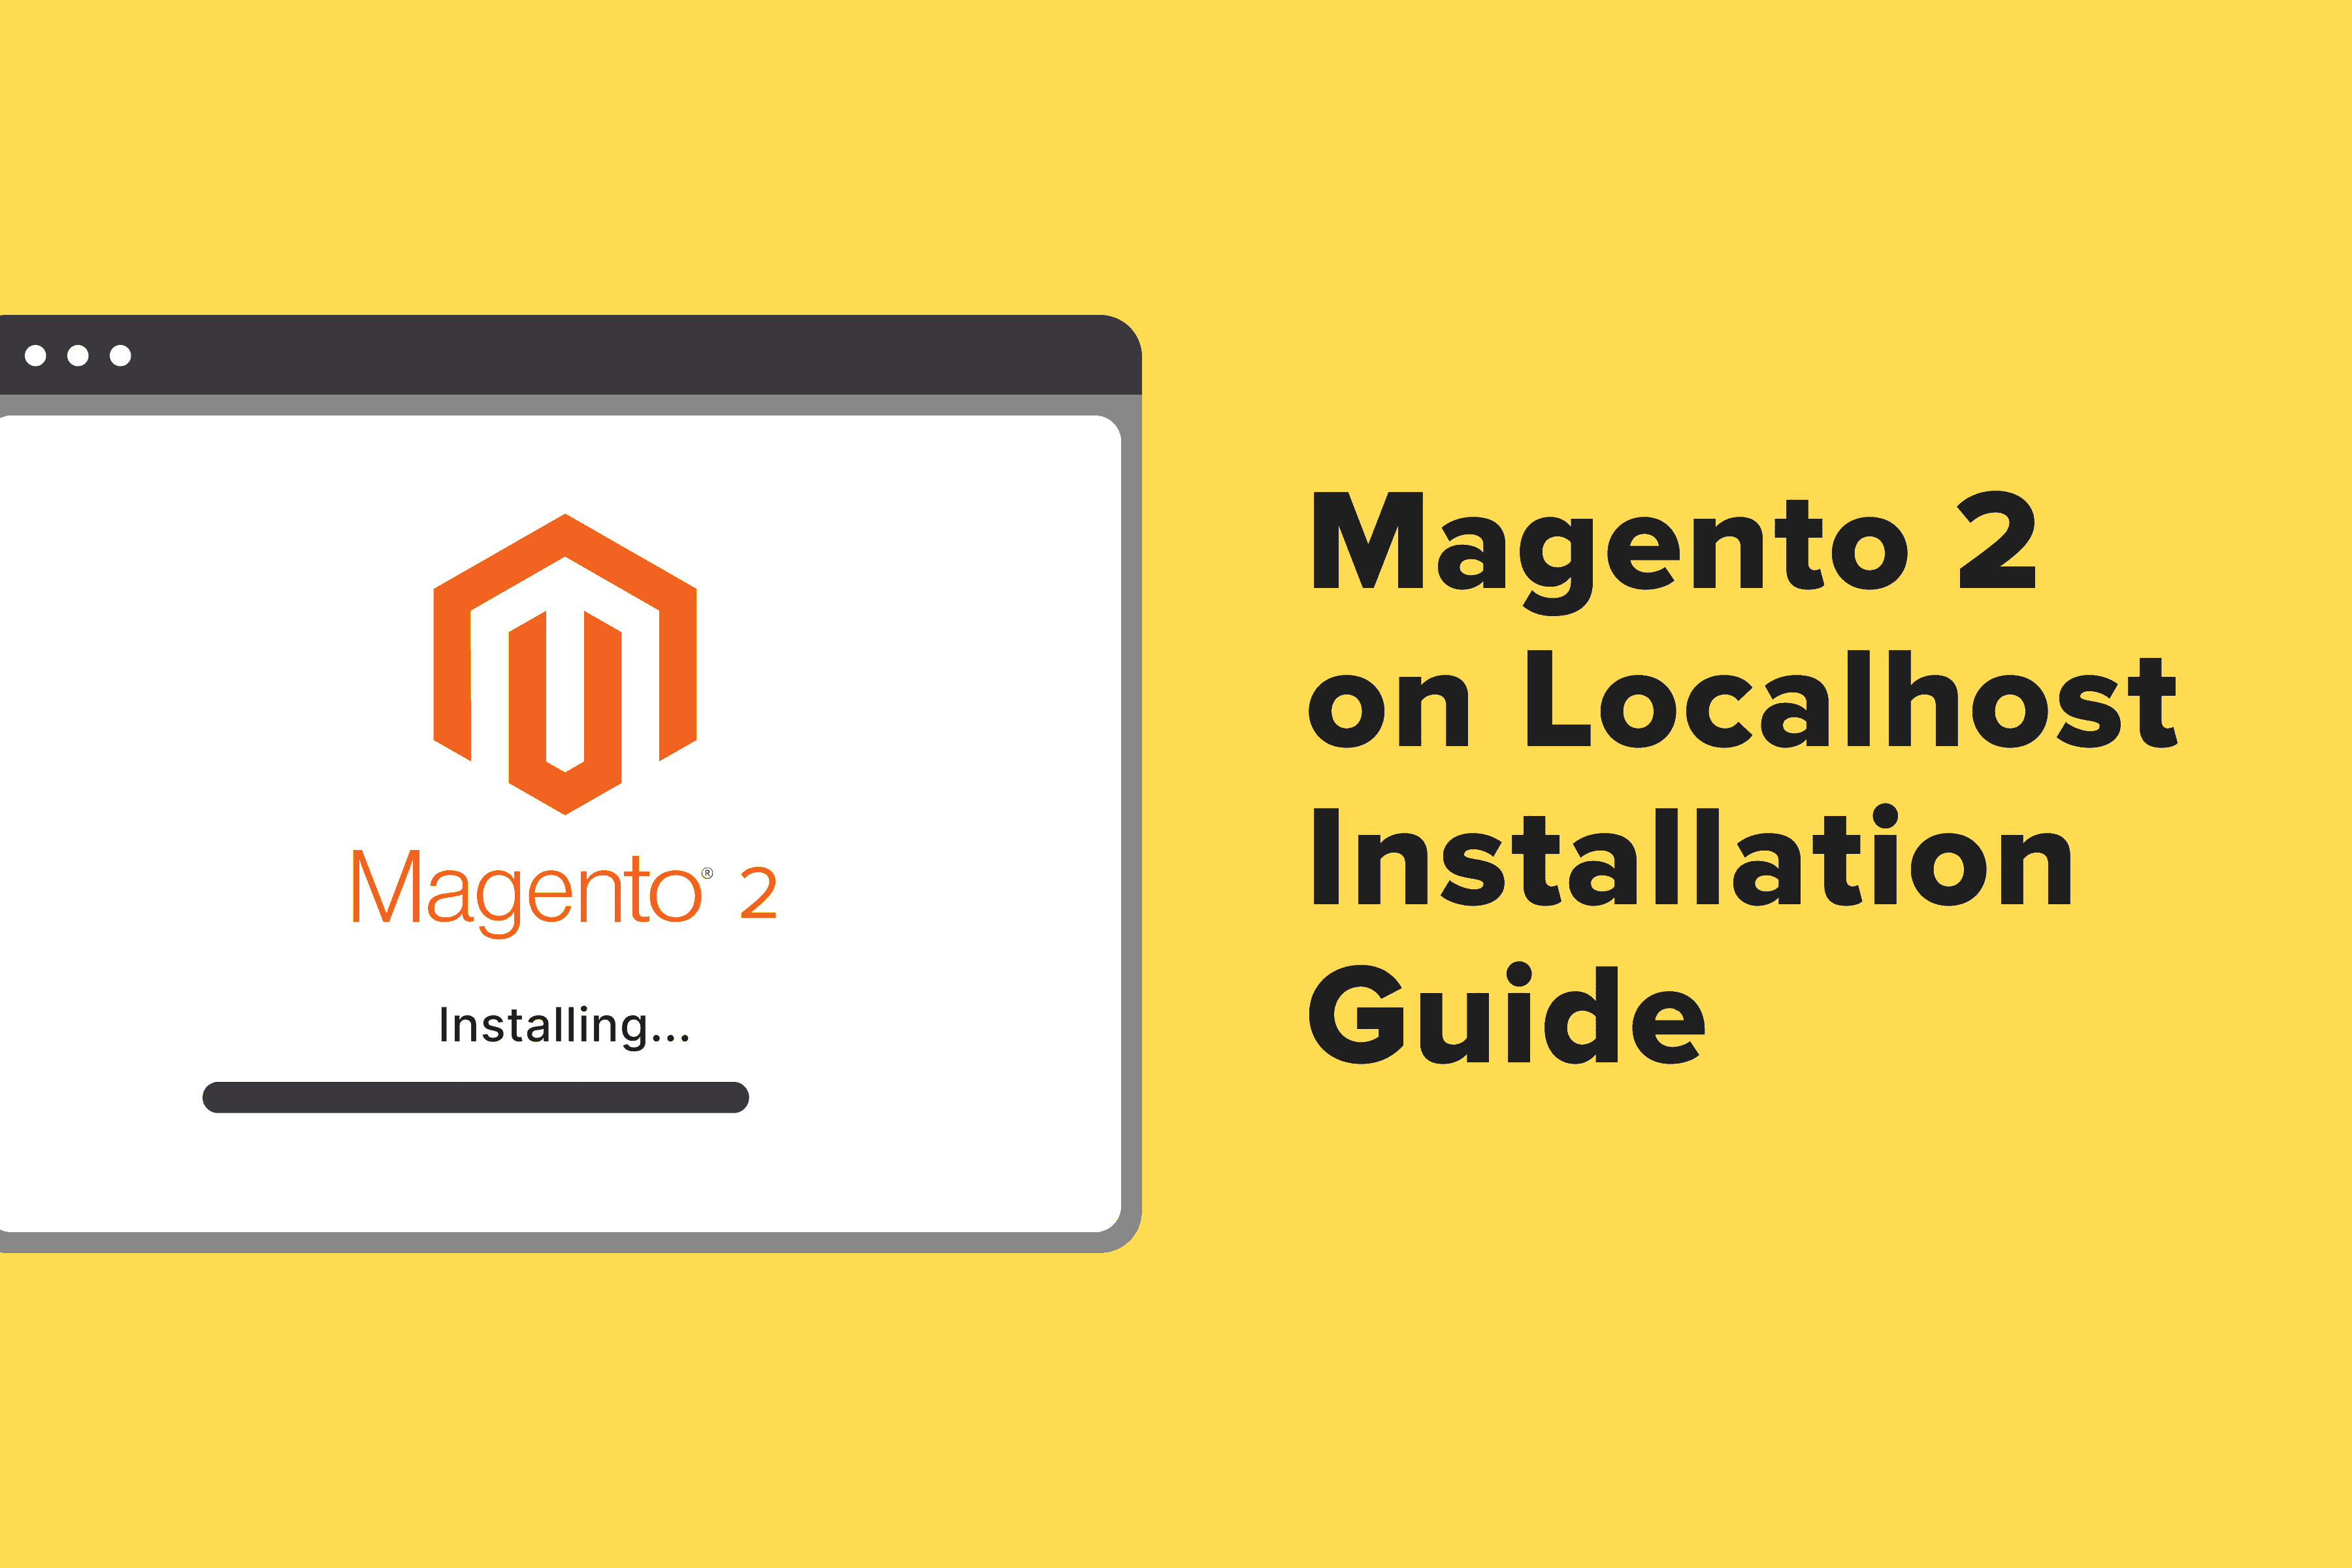 How to Install Magento 2 on Localhost (A Windows 10 Guide)